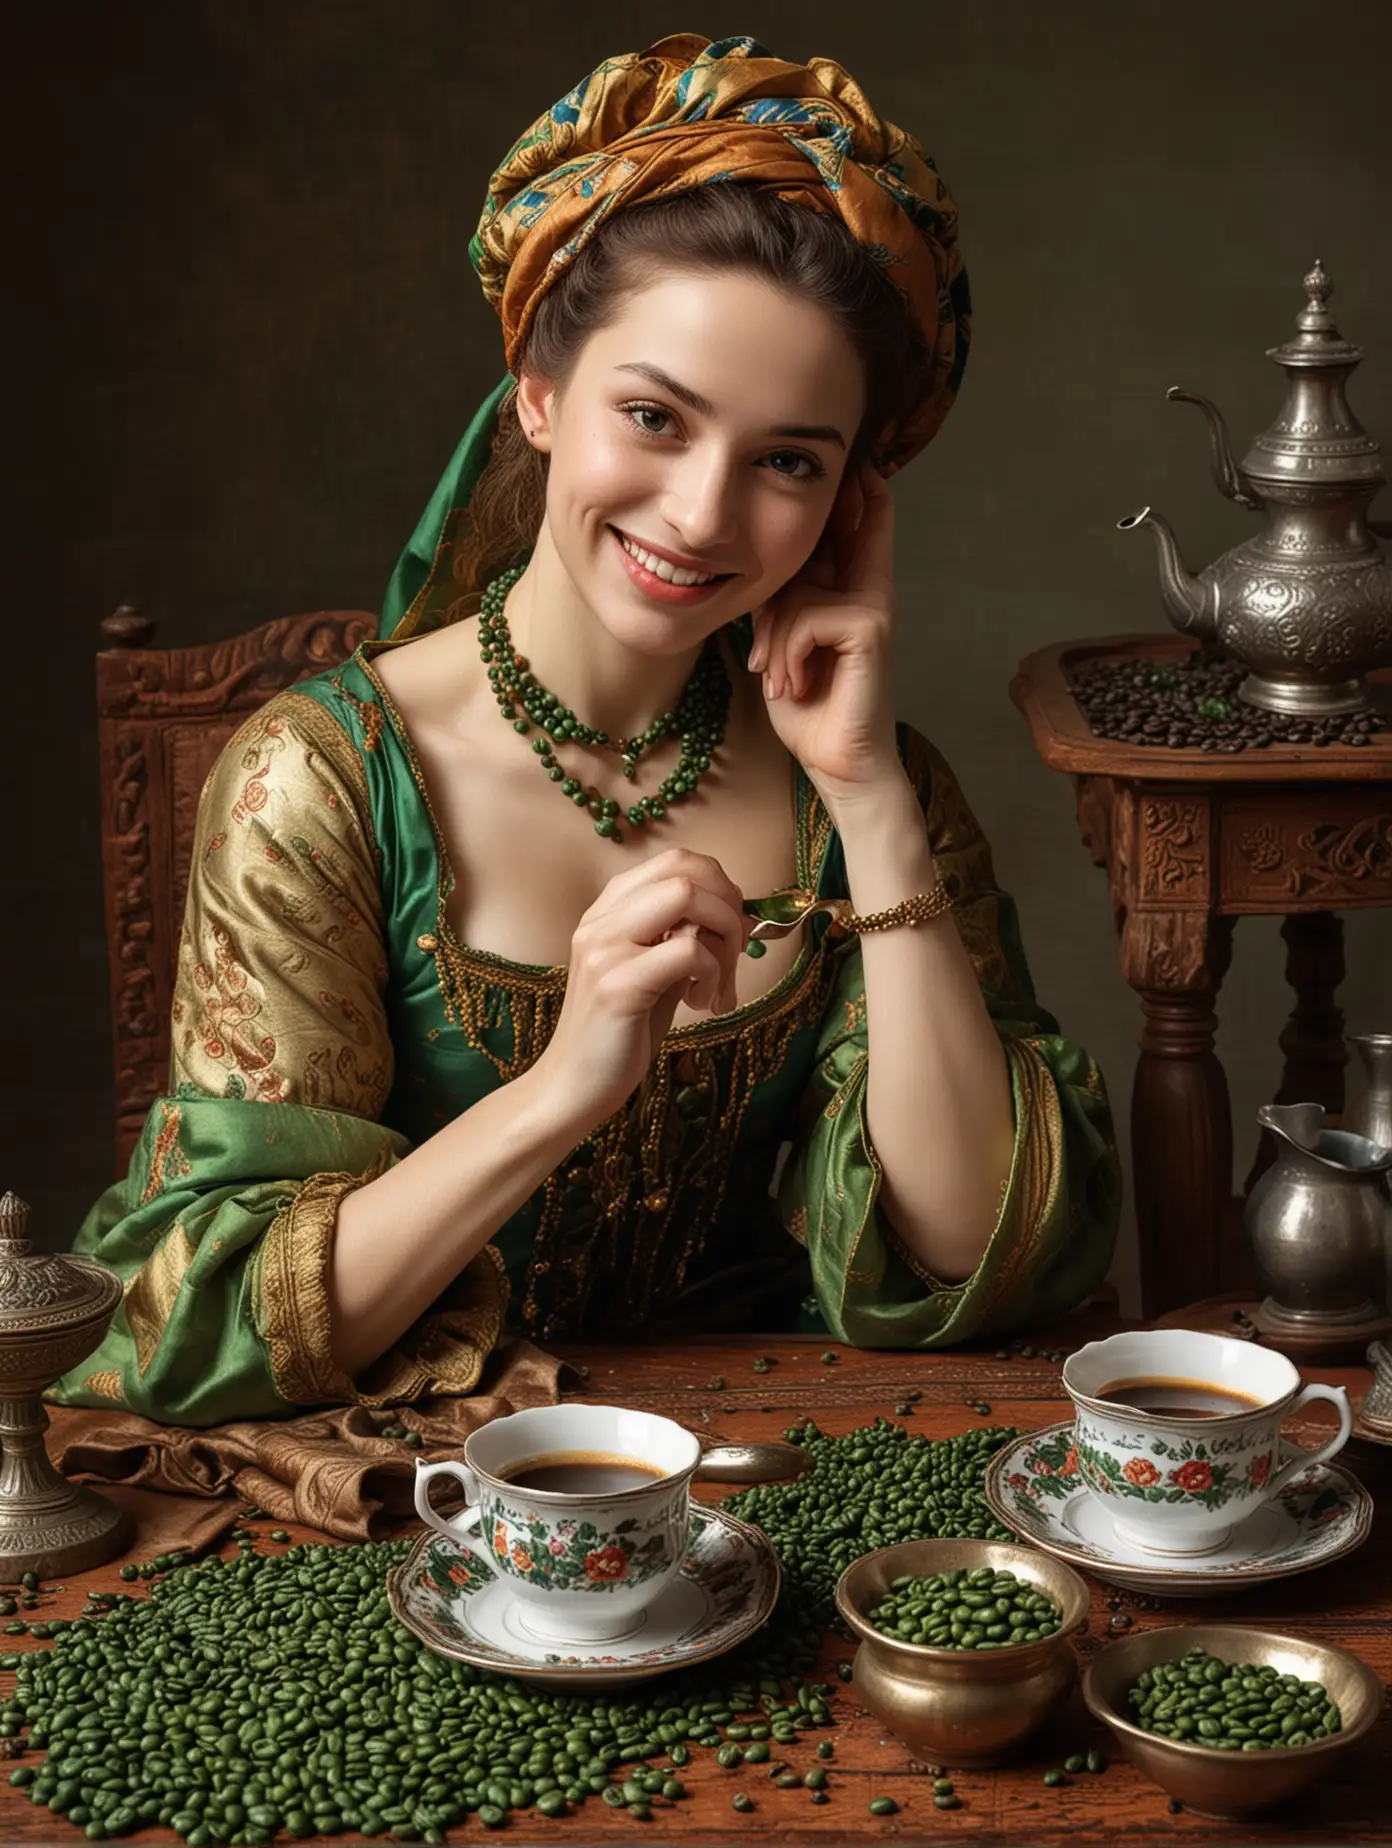 Smiling-17th-Century-Odalisque-Drinking-Coffee-with-Split-Green-Coffee-Beans-on-Table